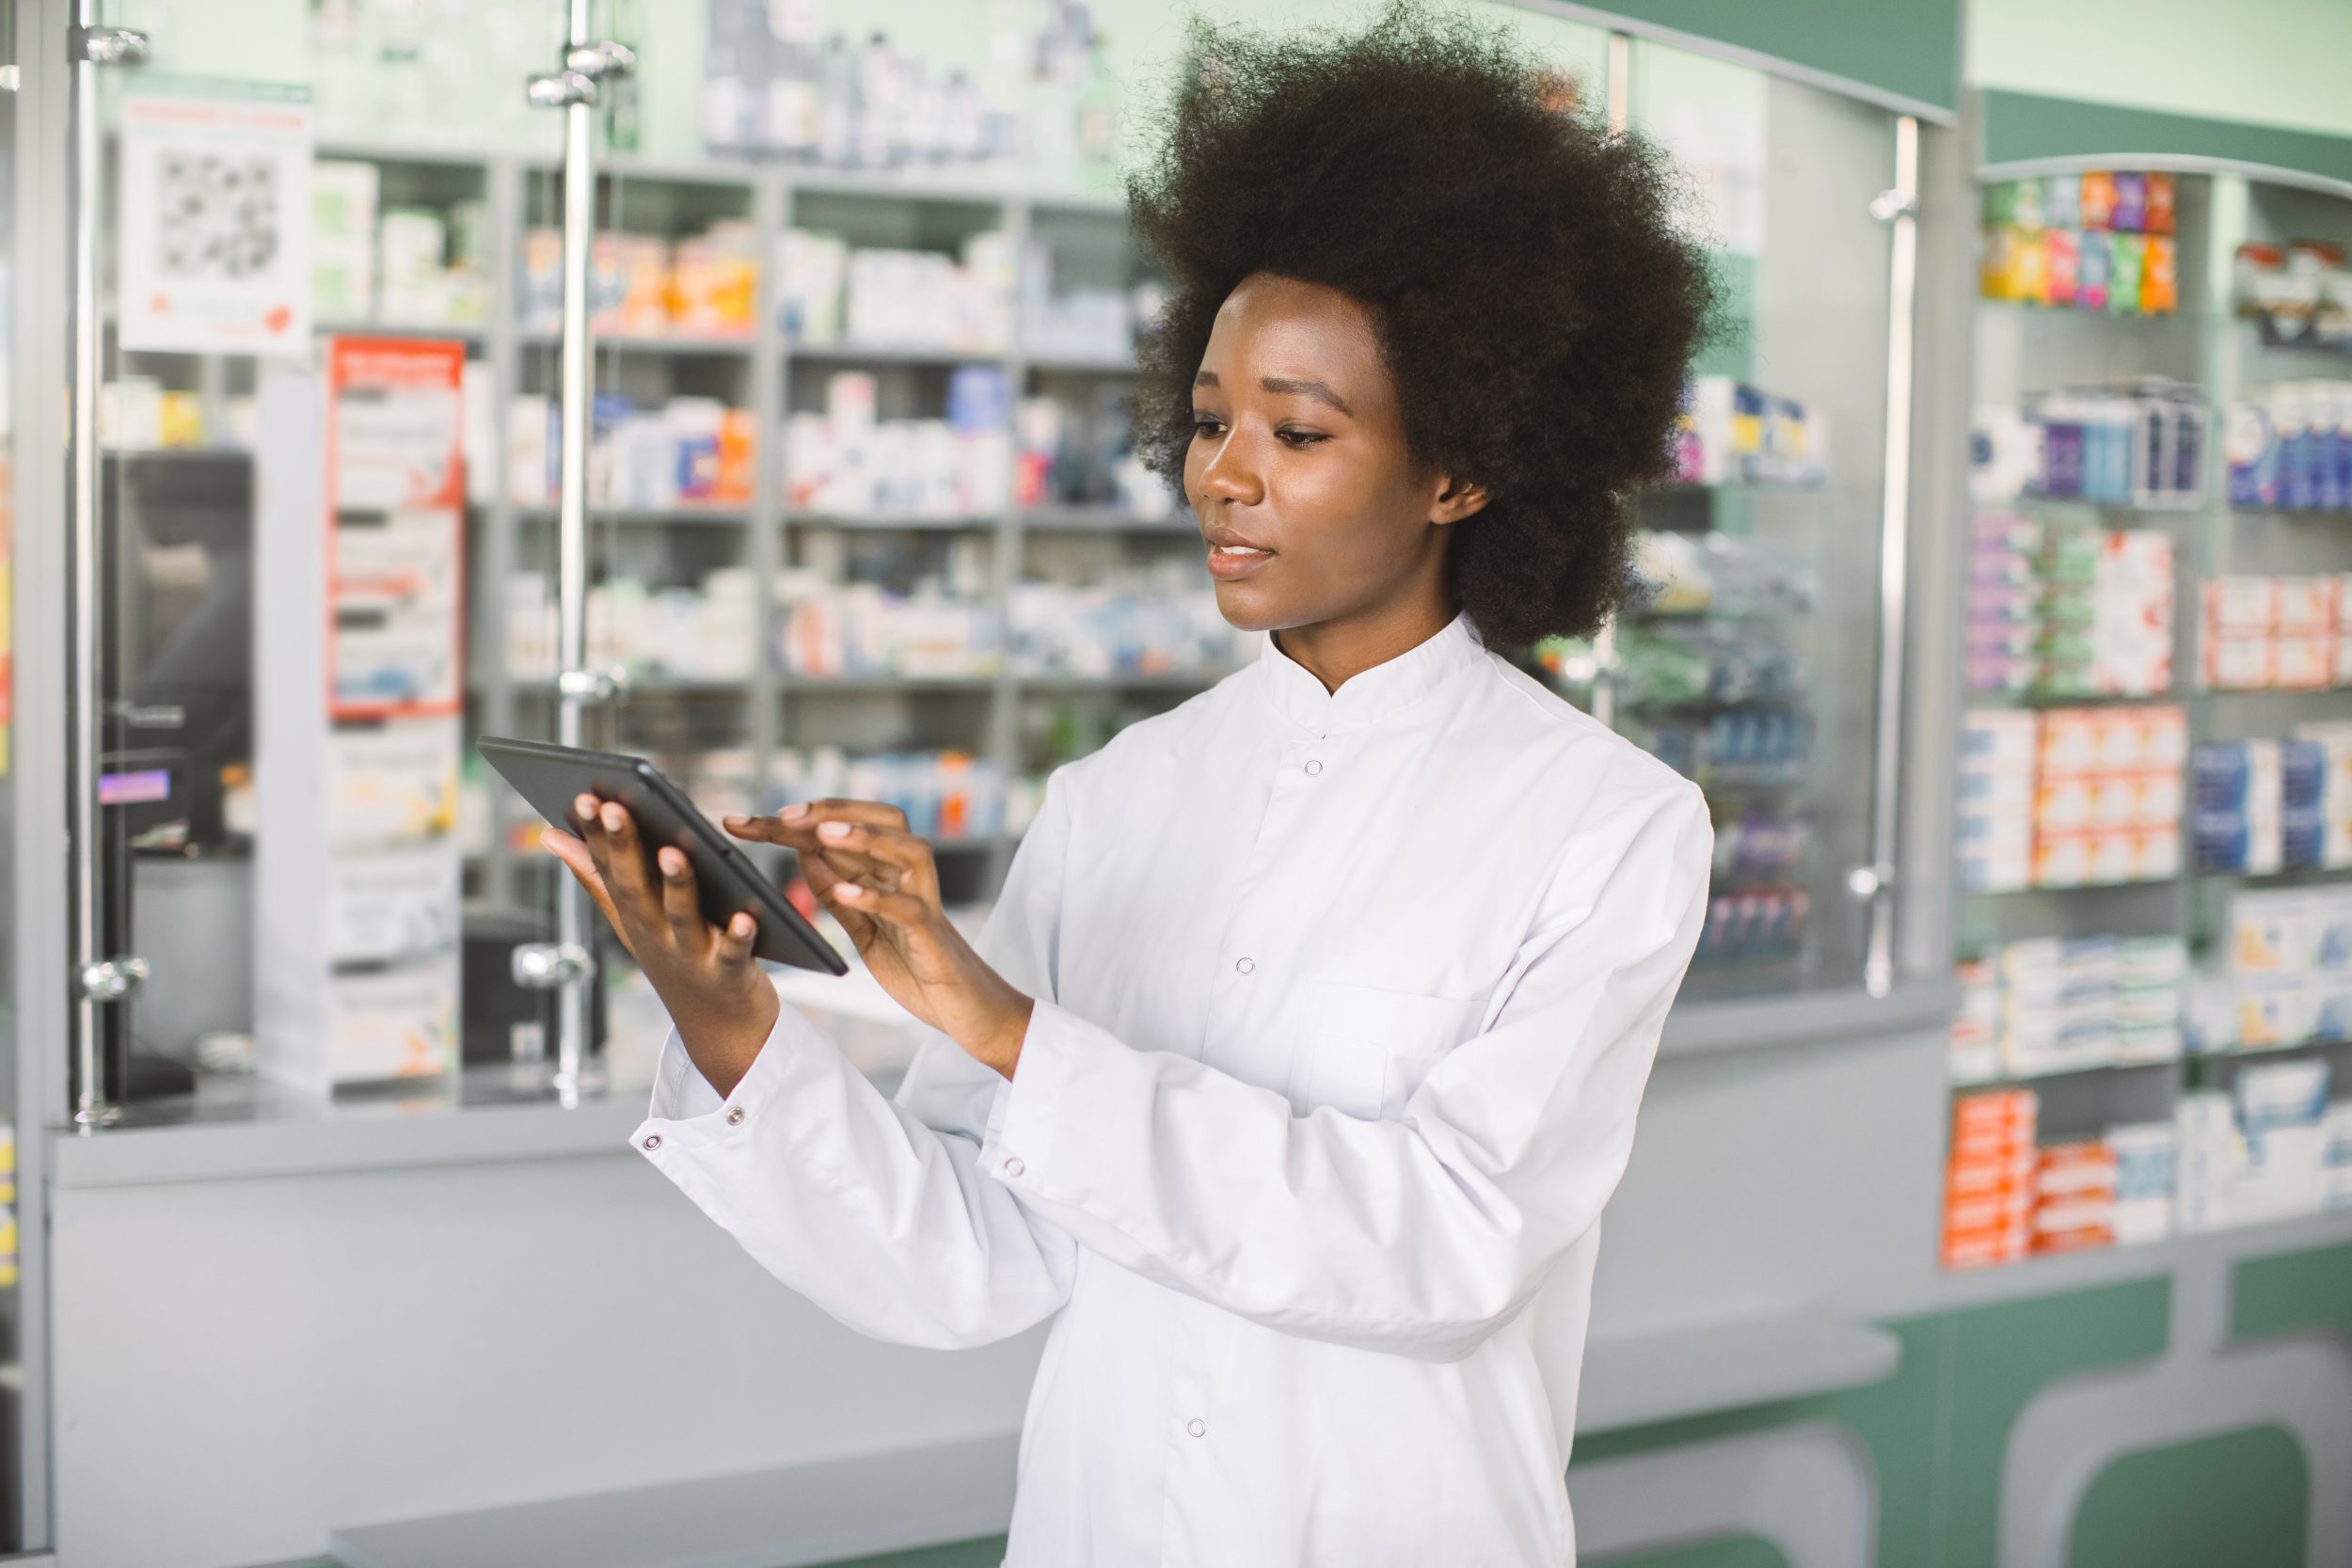 young confident pretty African woman doctor or pharmacist using digital tablet while standing in interior of modern hospital pharmacy or clinic. hospital pharmacy equipment